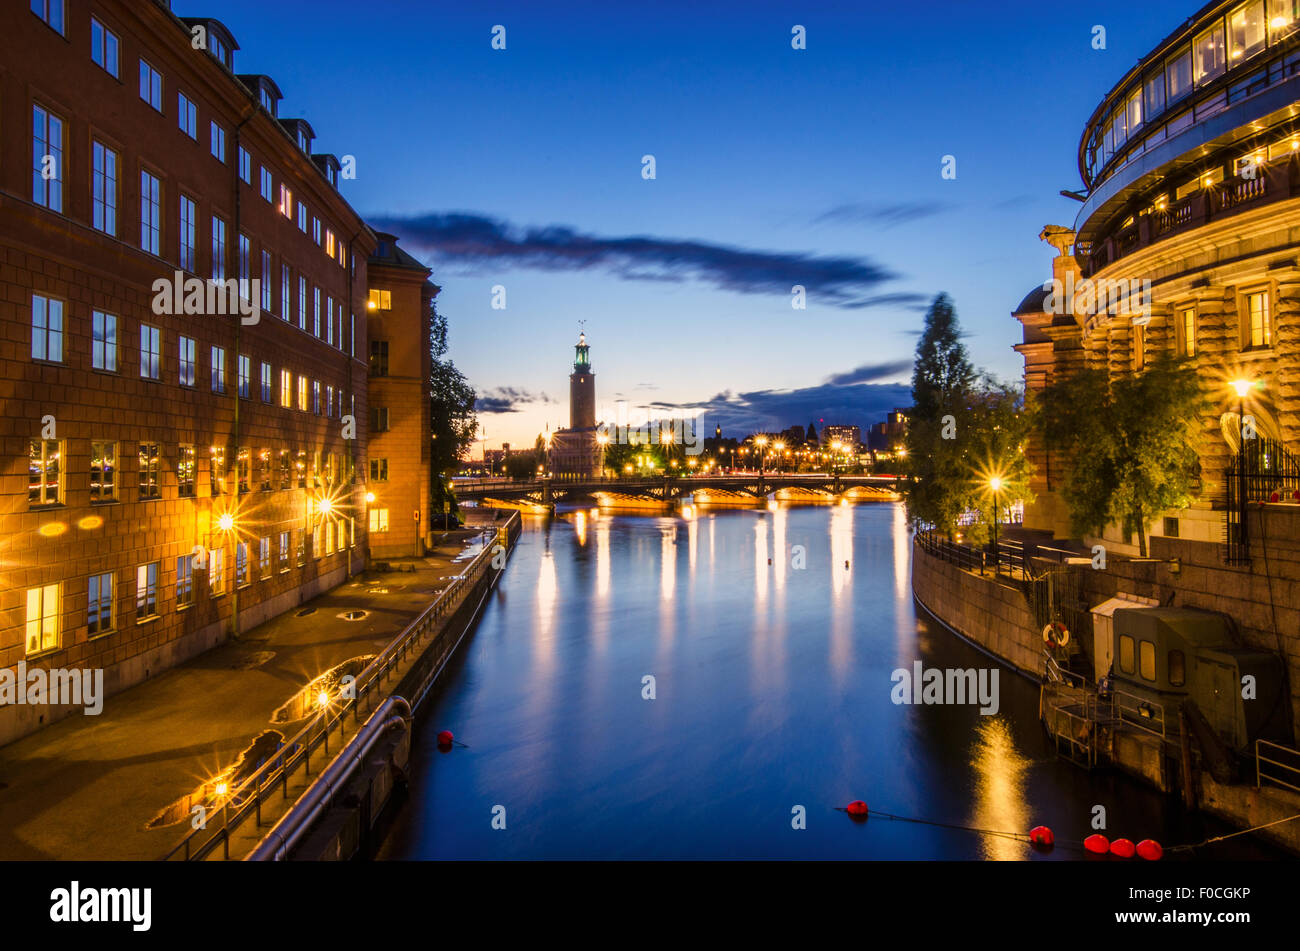 Some buildings at night in Stockholm. Stock Photo